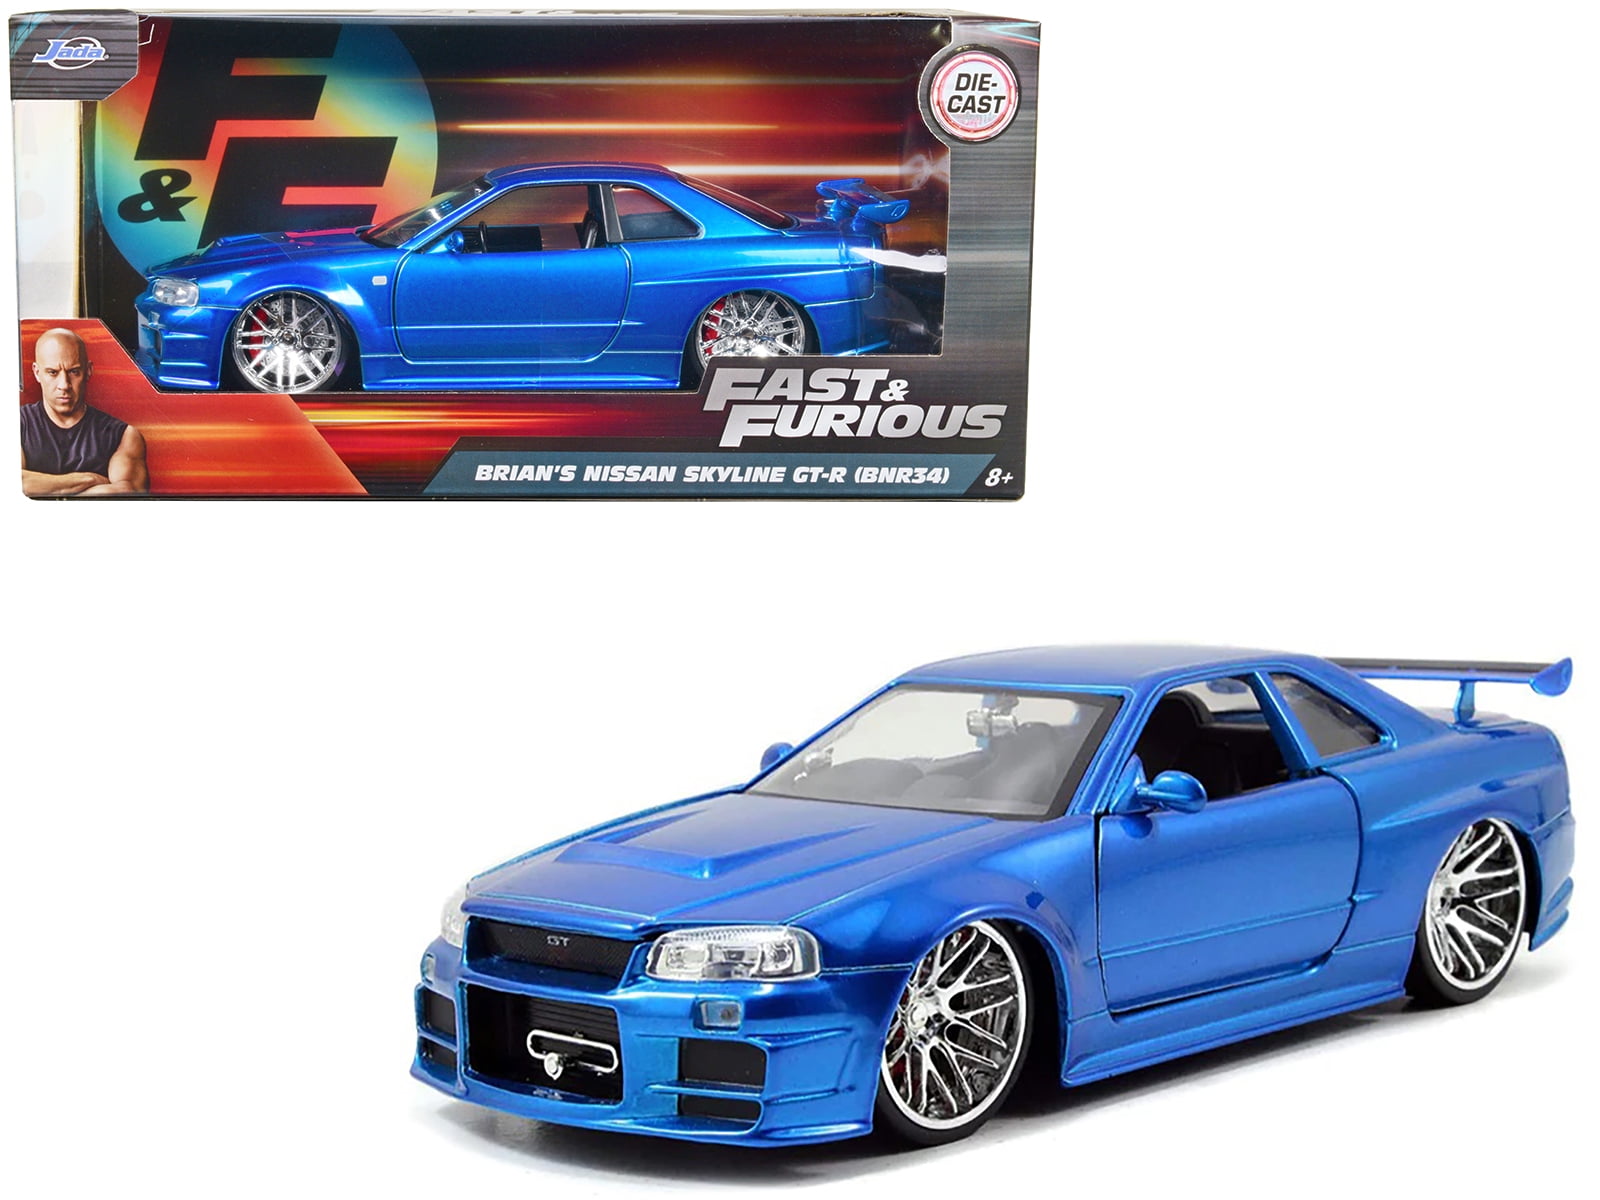 Fast Furious Toys 